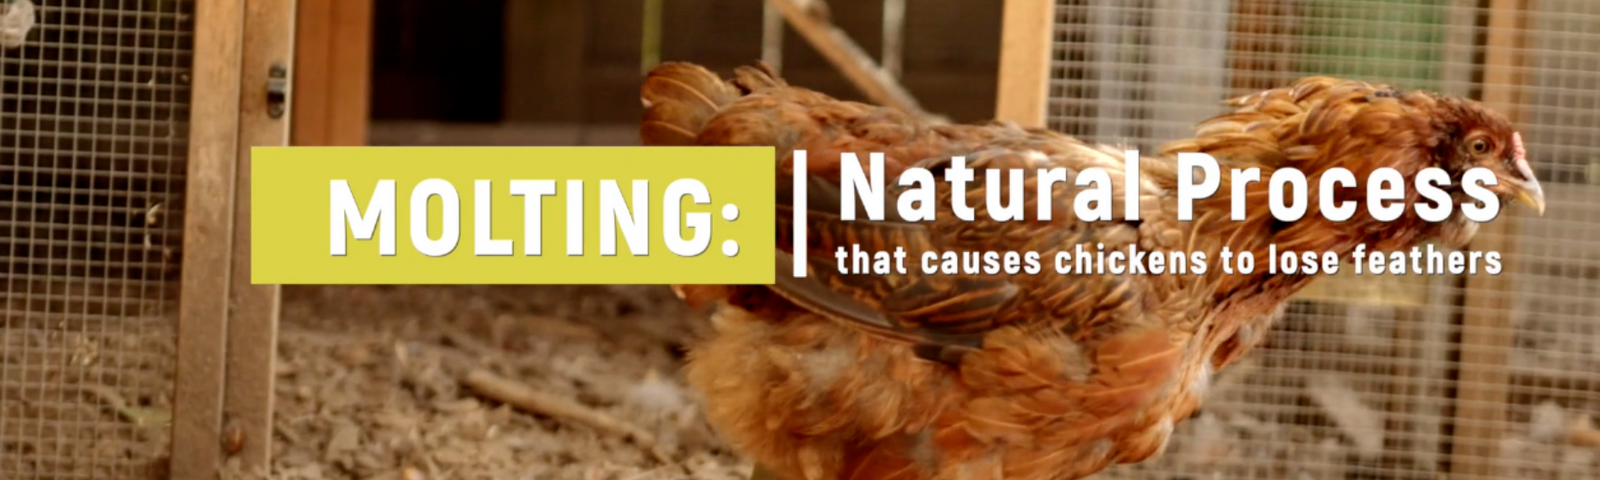 What is Molting?